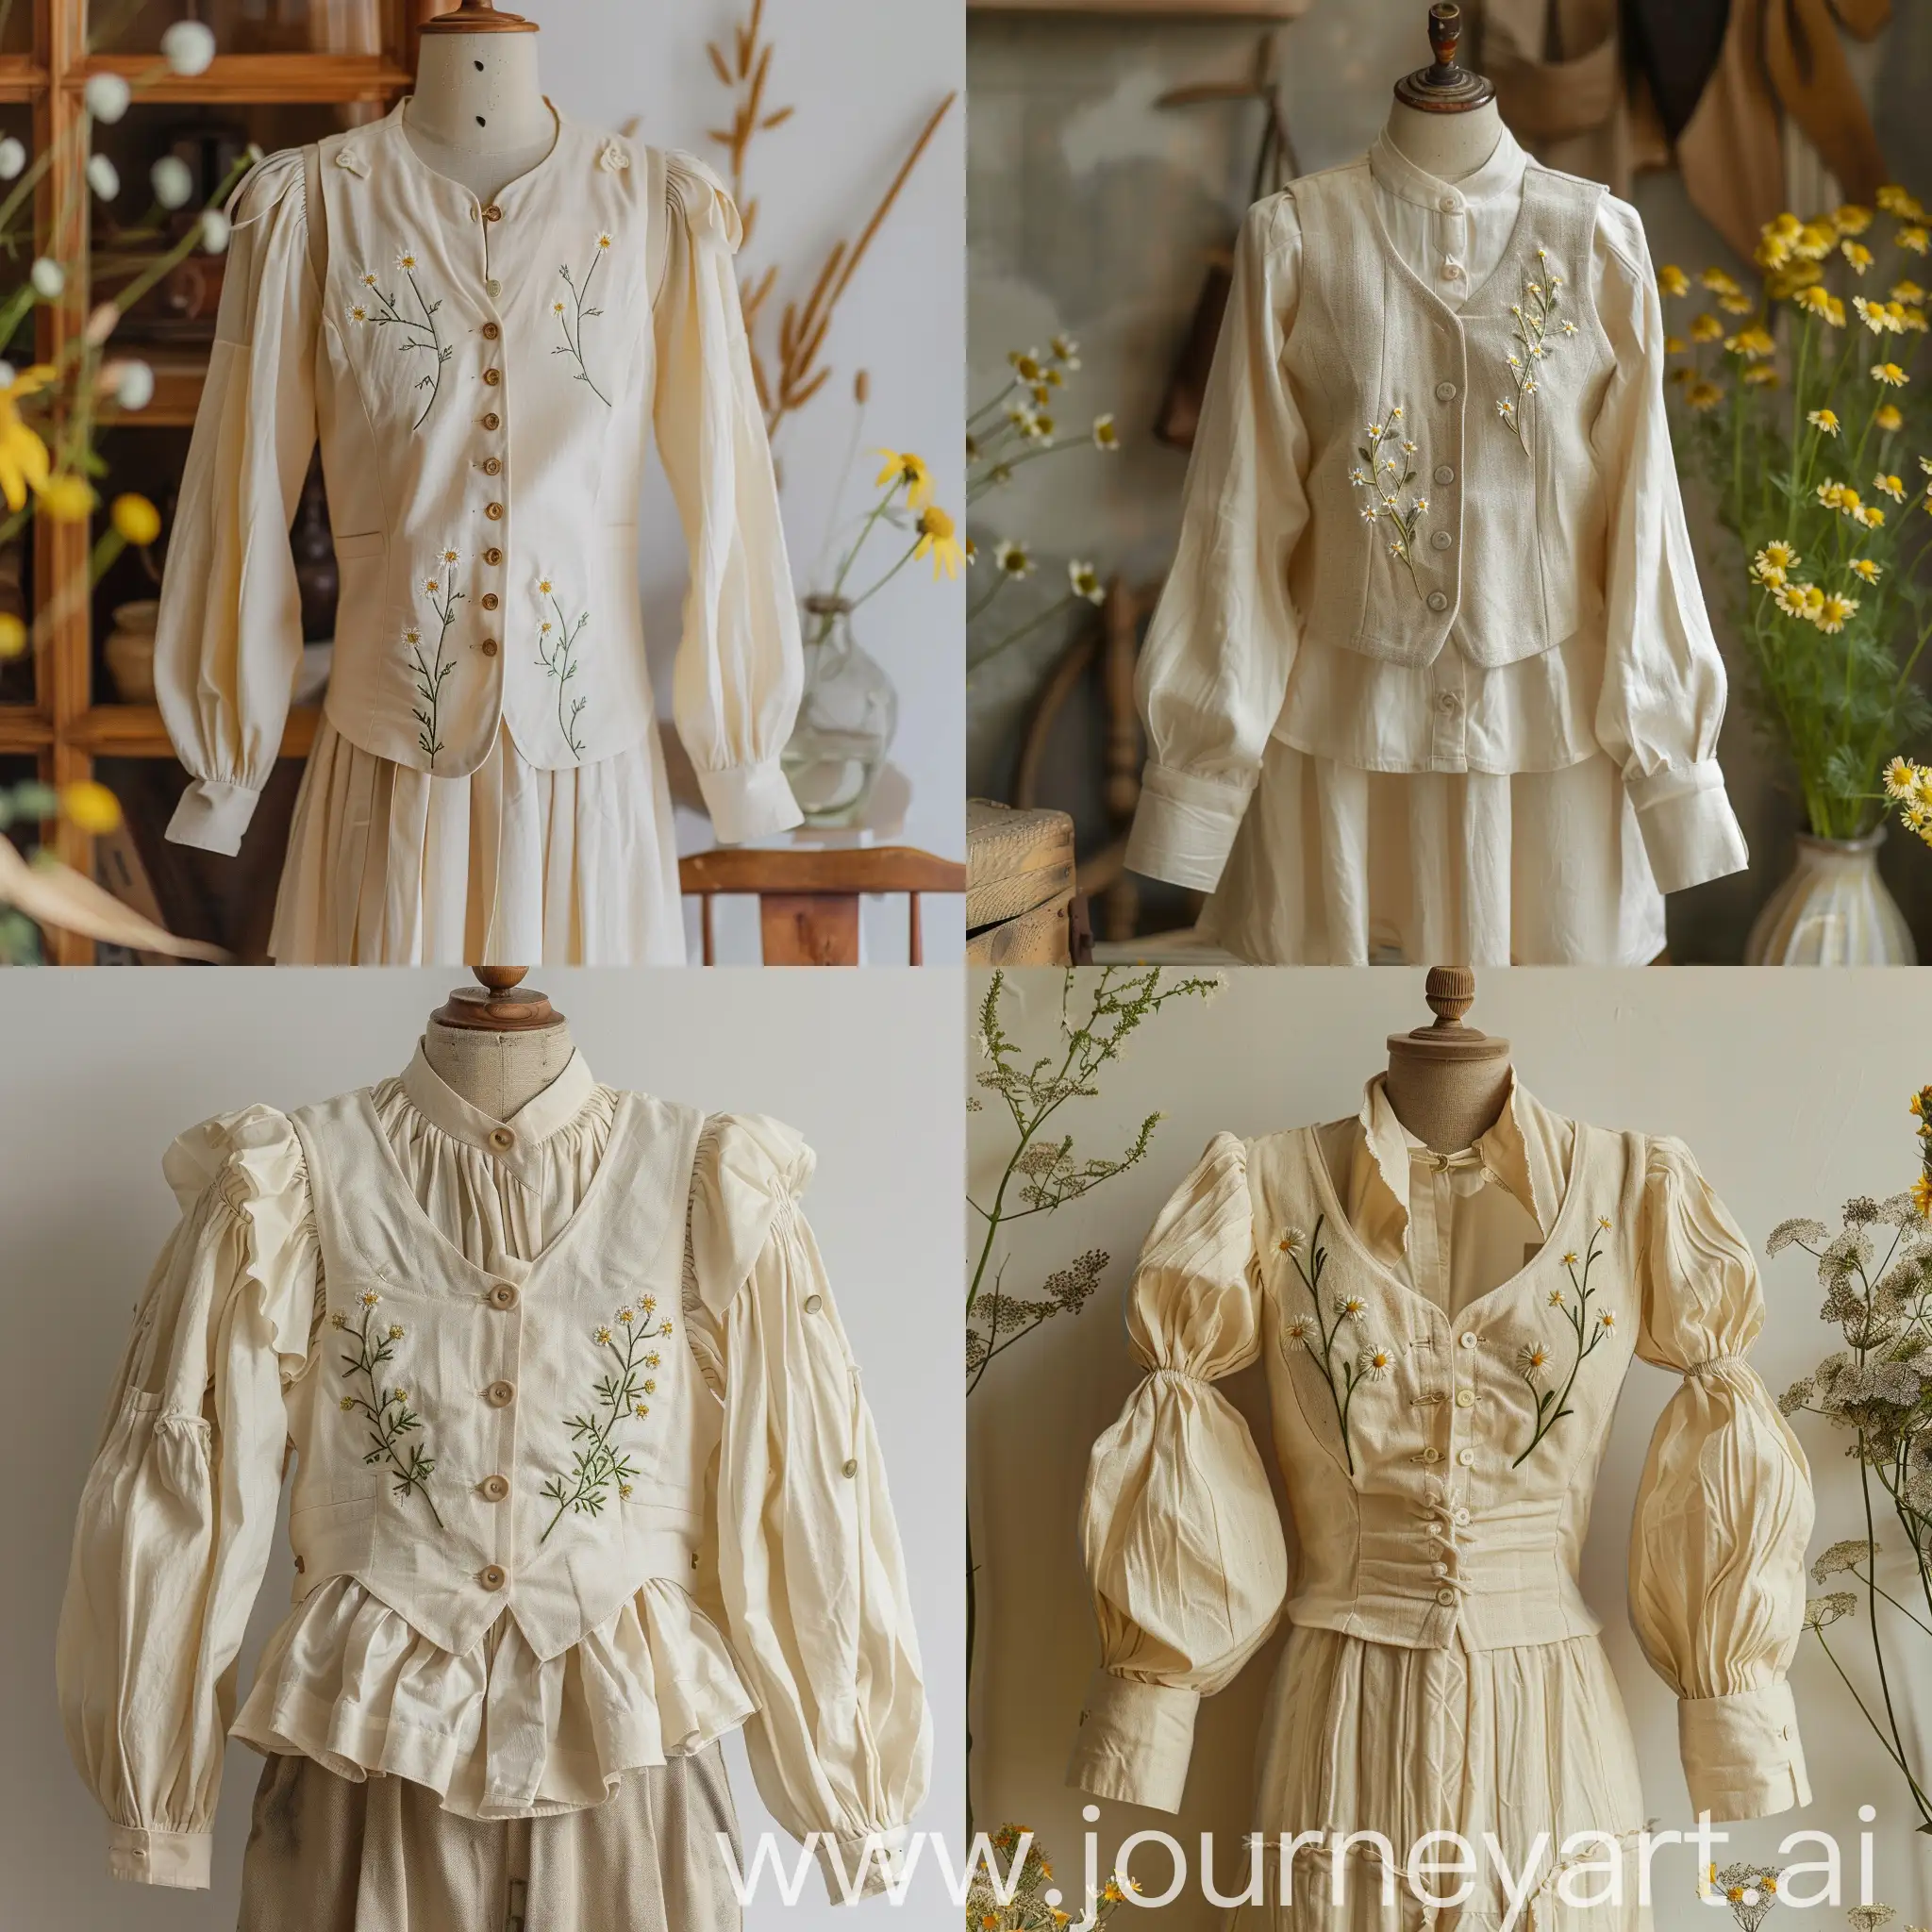 Chic-Cream-Cotton-Blouse-and-Vest-with-Camomile-Embroidery